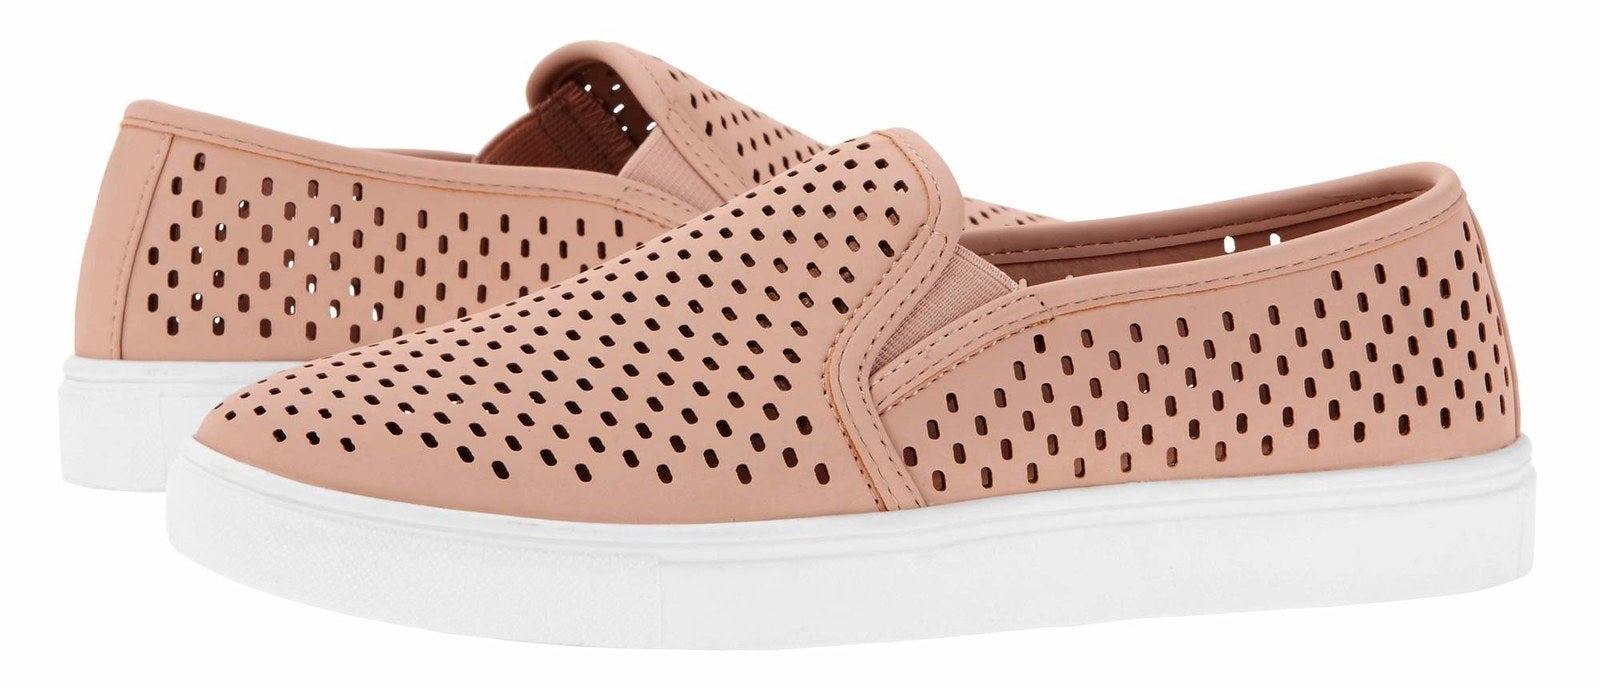 21 Surprisingly Cute Shoes From Walmart